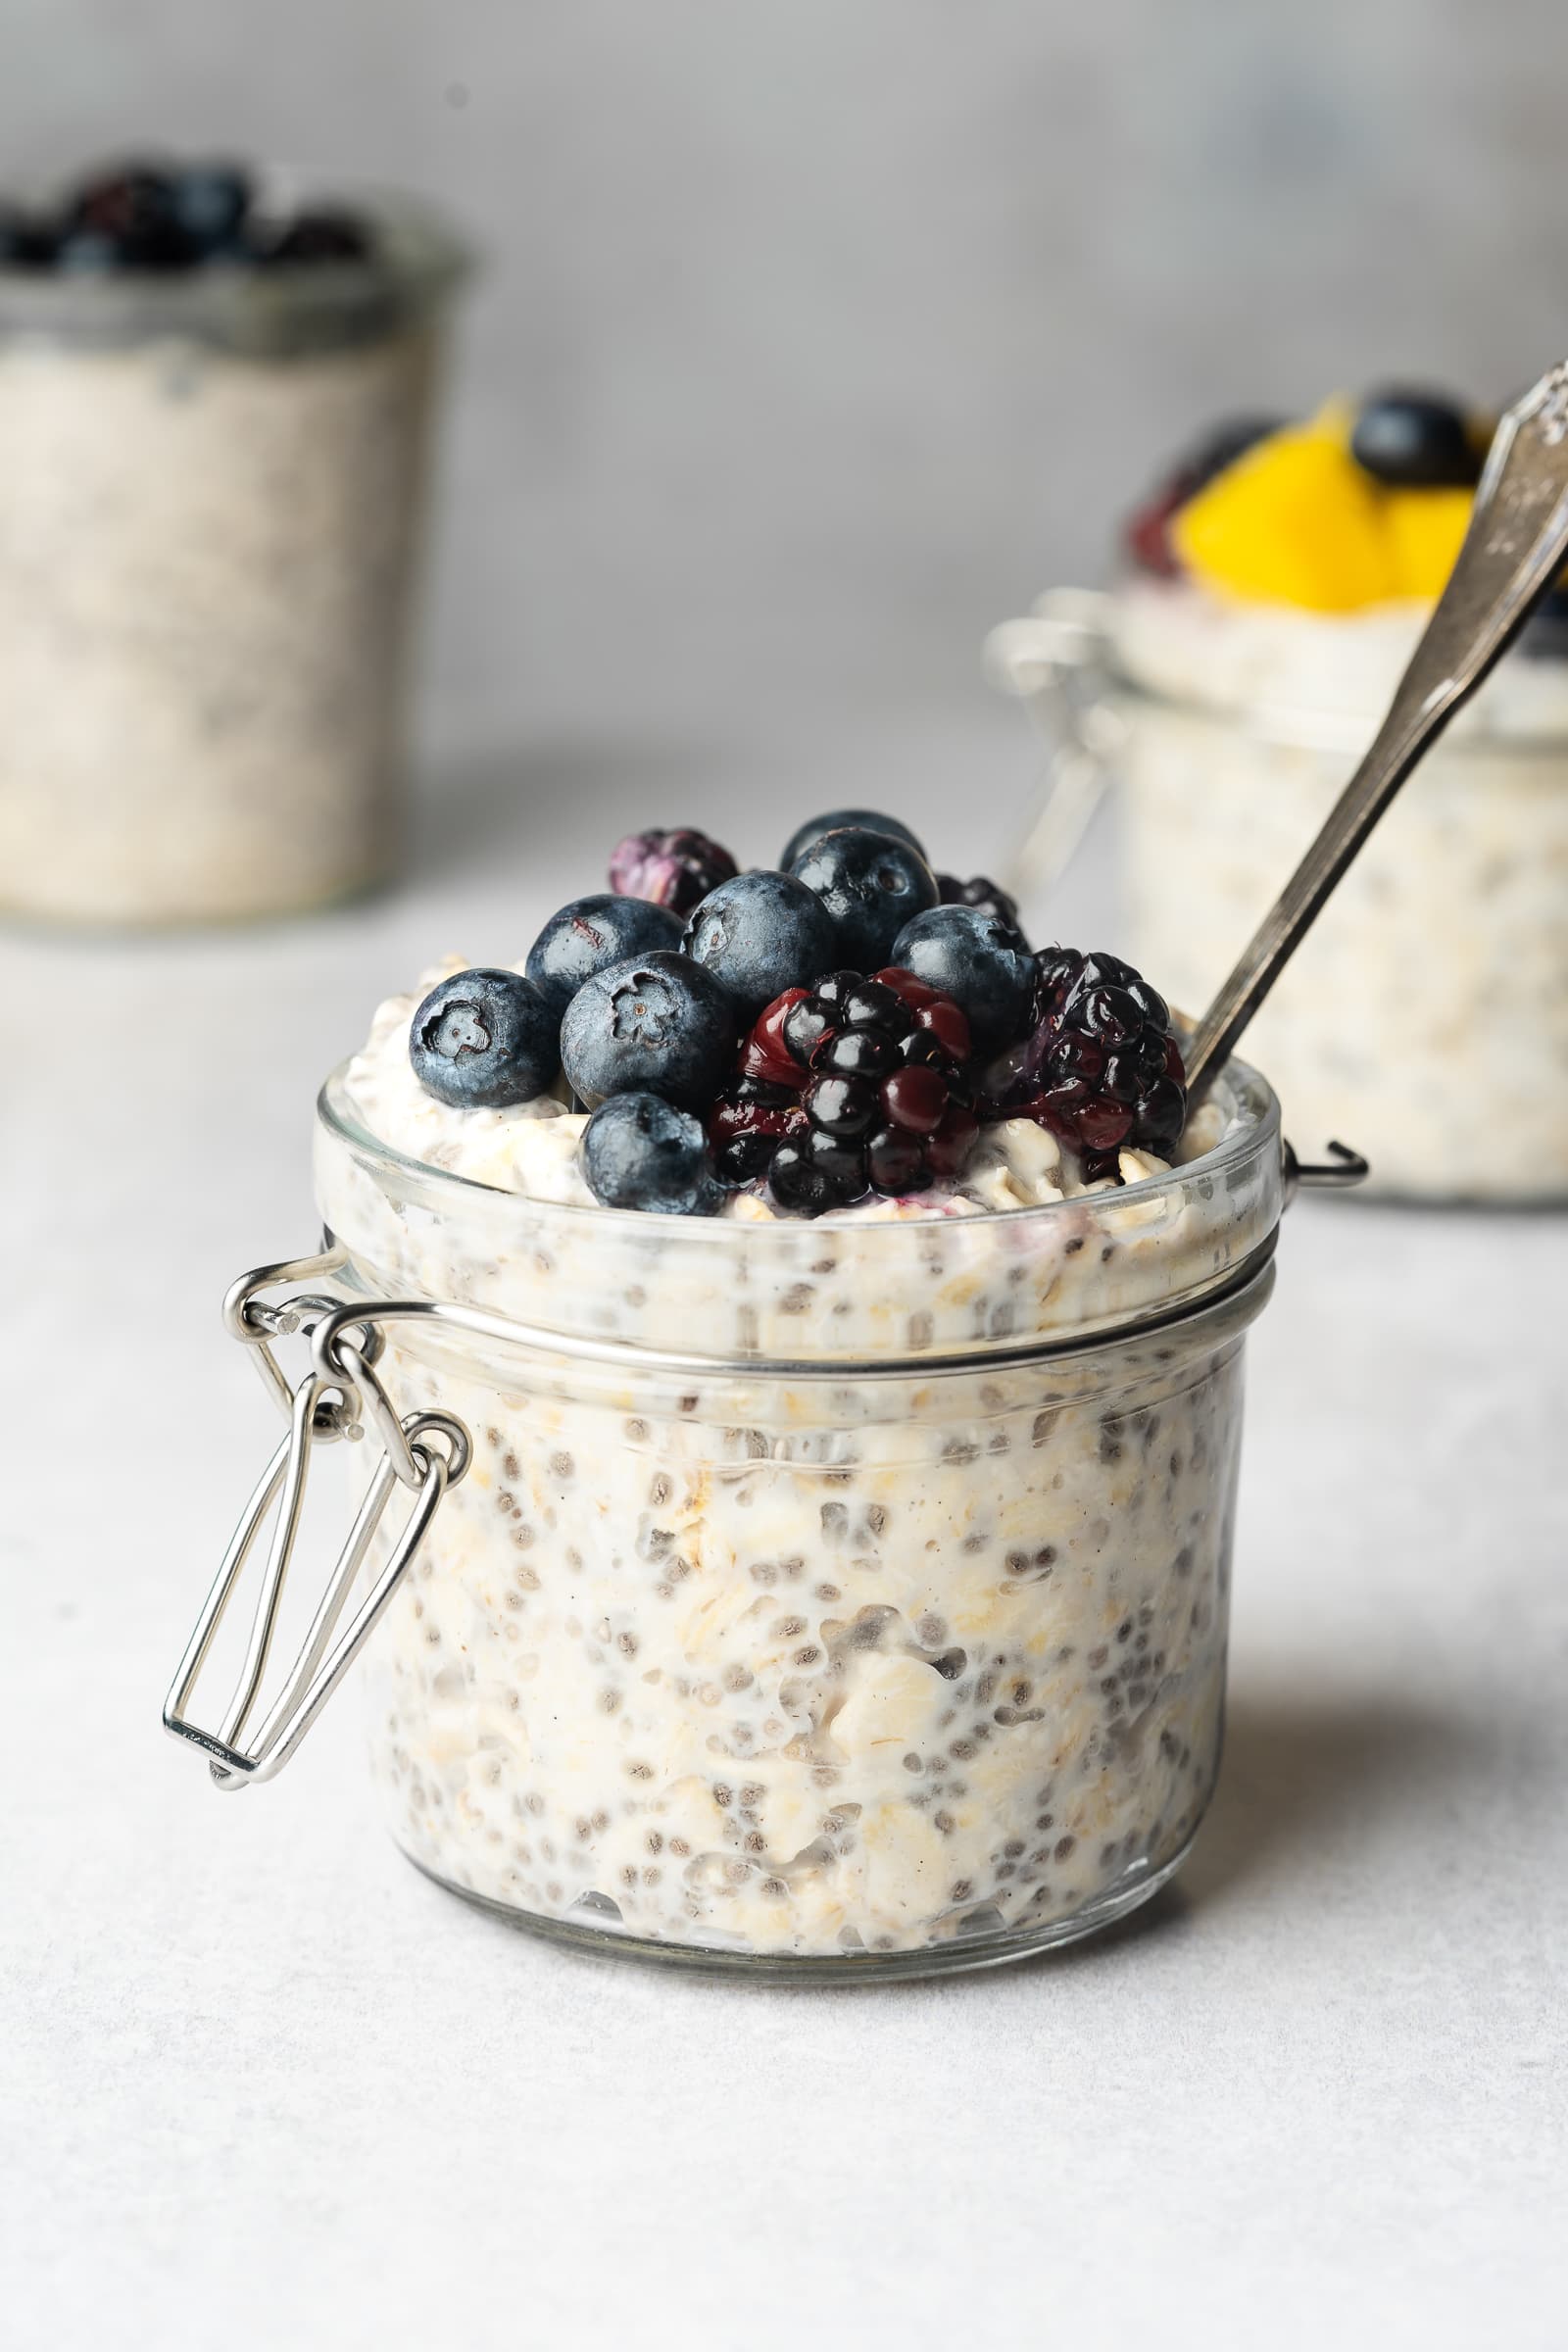 Small glass jar of almond milk overnight oats topped with blueberries and blackberries.